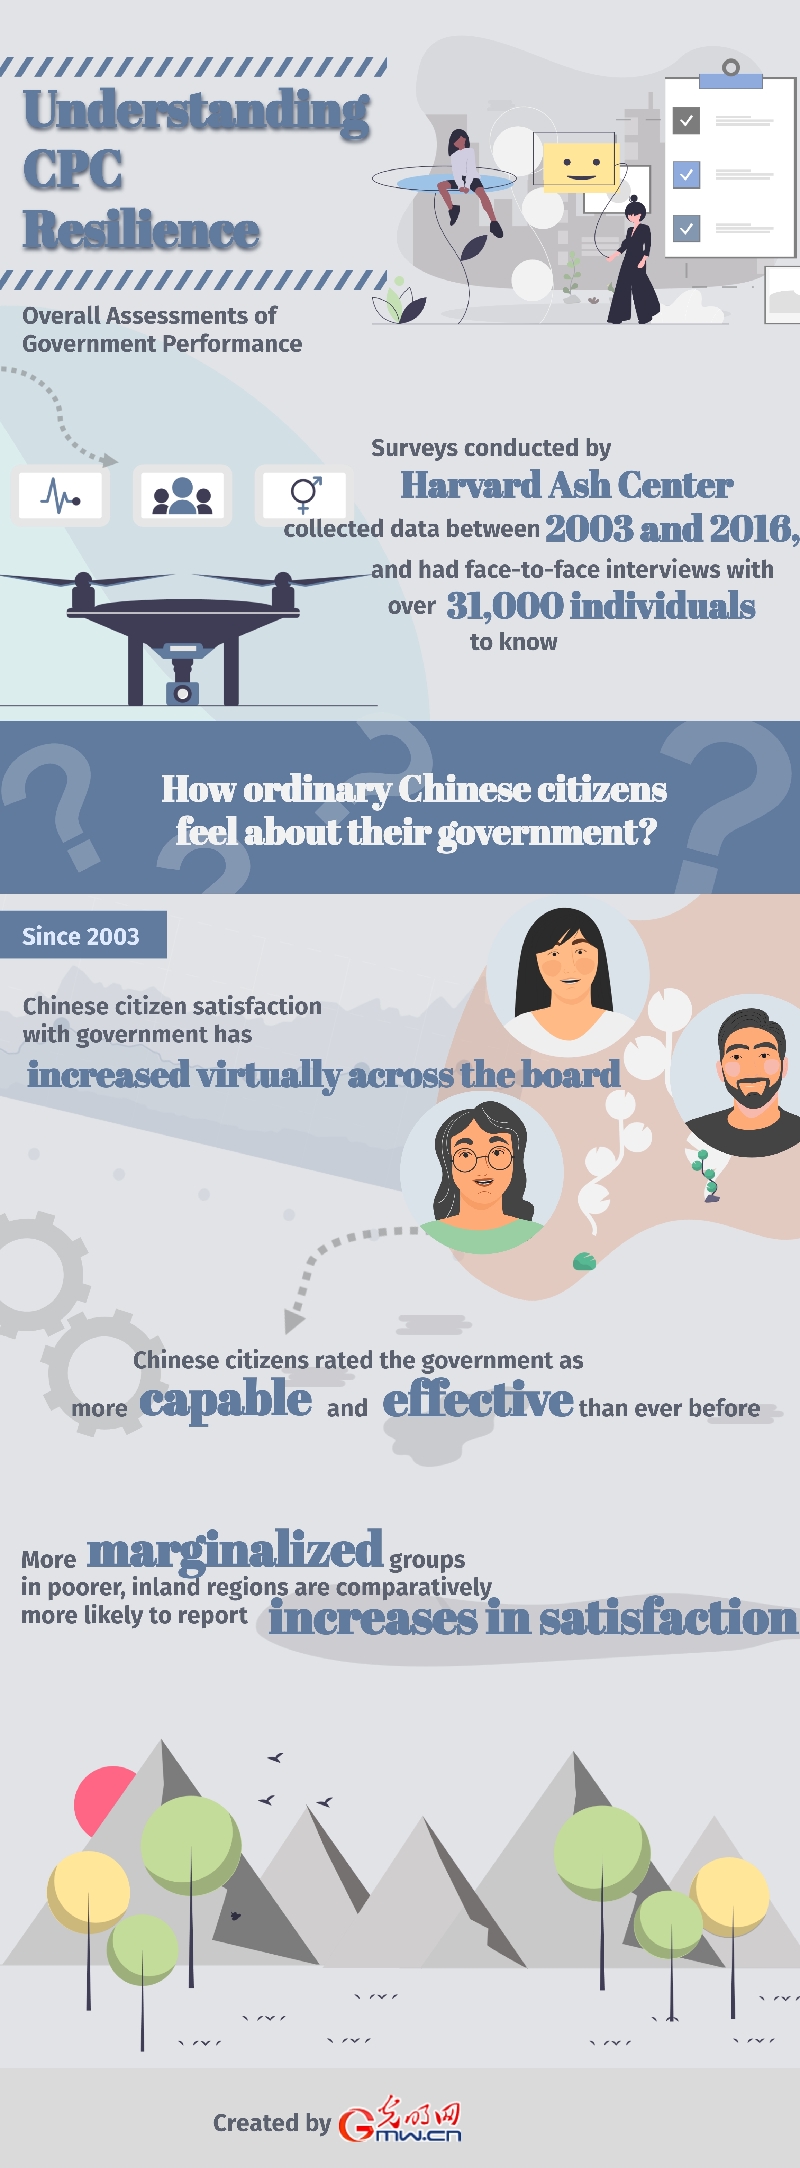 Infographic: How did ordinary Chinese citizens feel about their government?